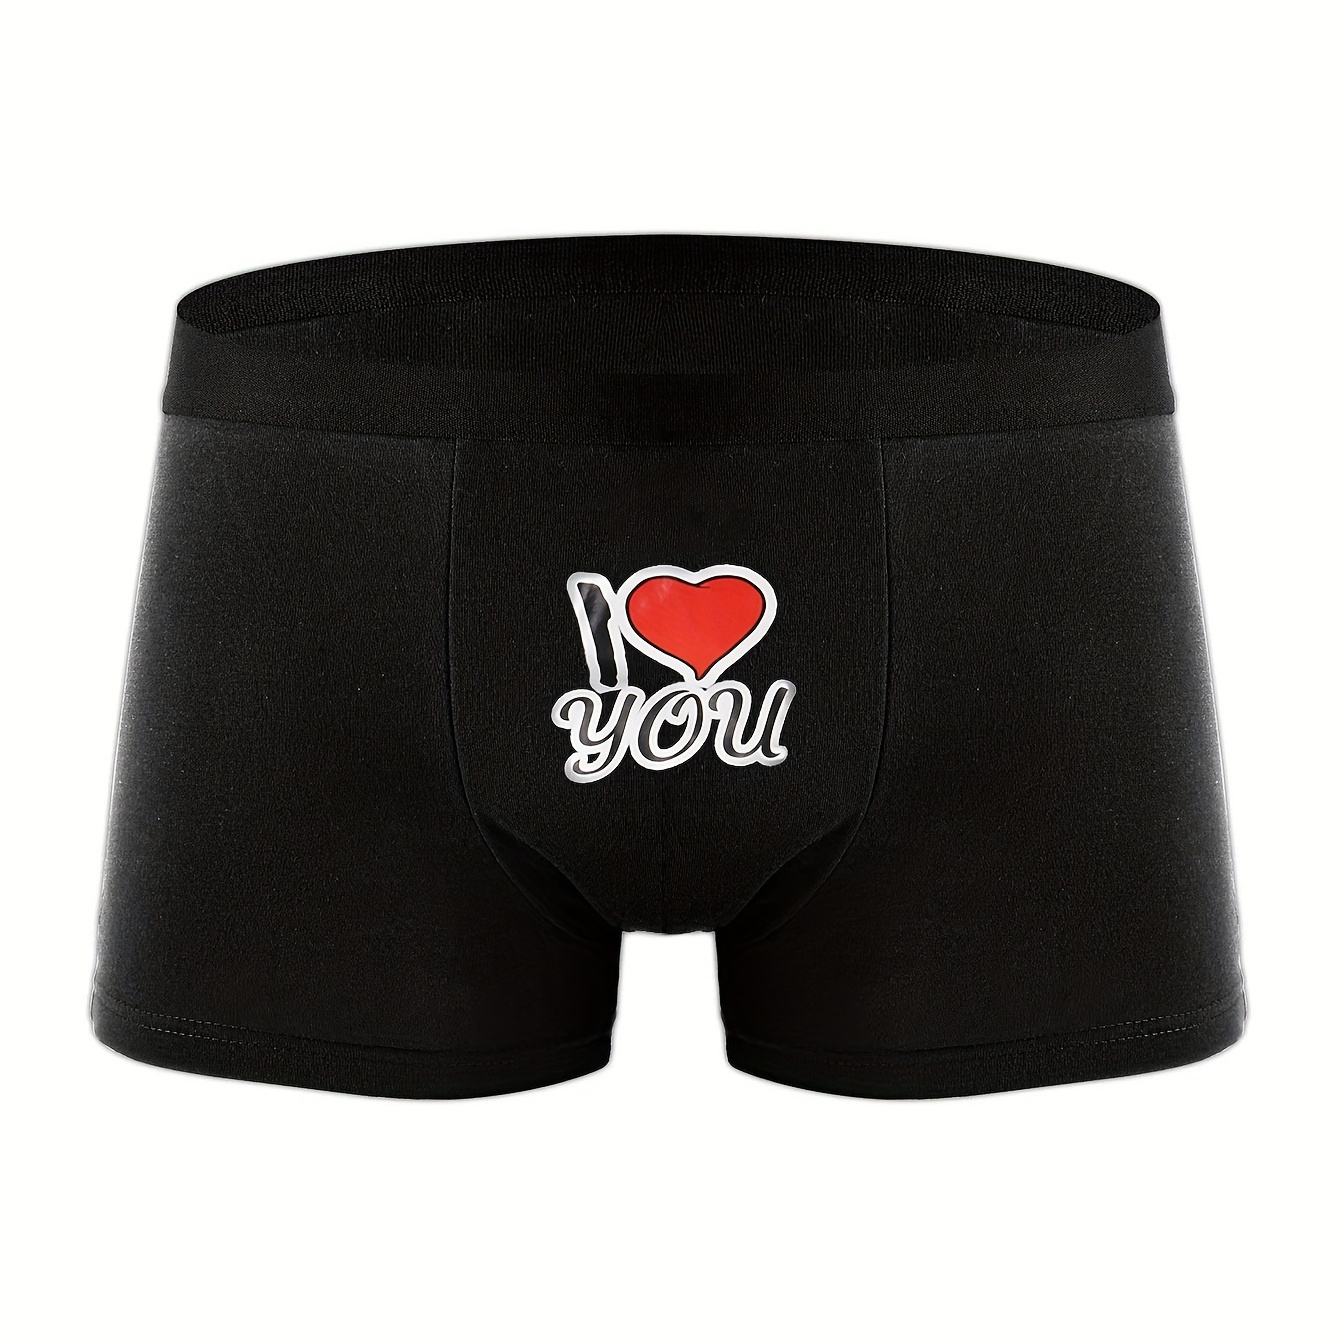 

I Love You Print Men's Fashion Graphic Boxer Briefs Shorts, Thin Breathable Soft Comfy Boxer Trunks, Men's Novelty Funny Underwear, Valentine's Day Gifts